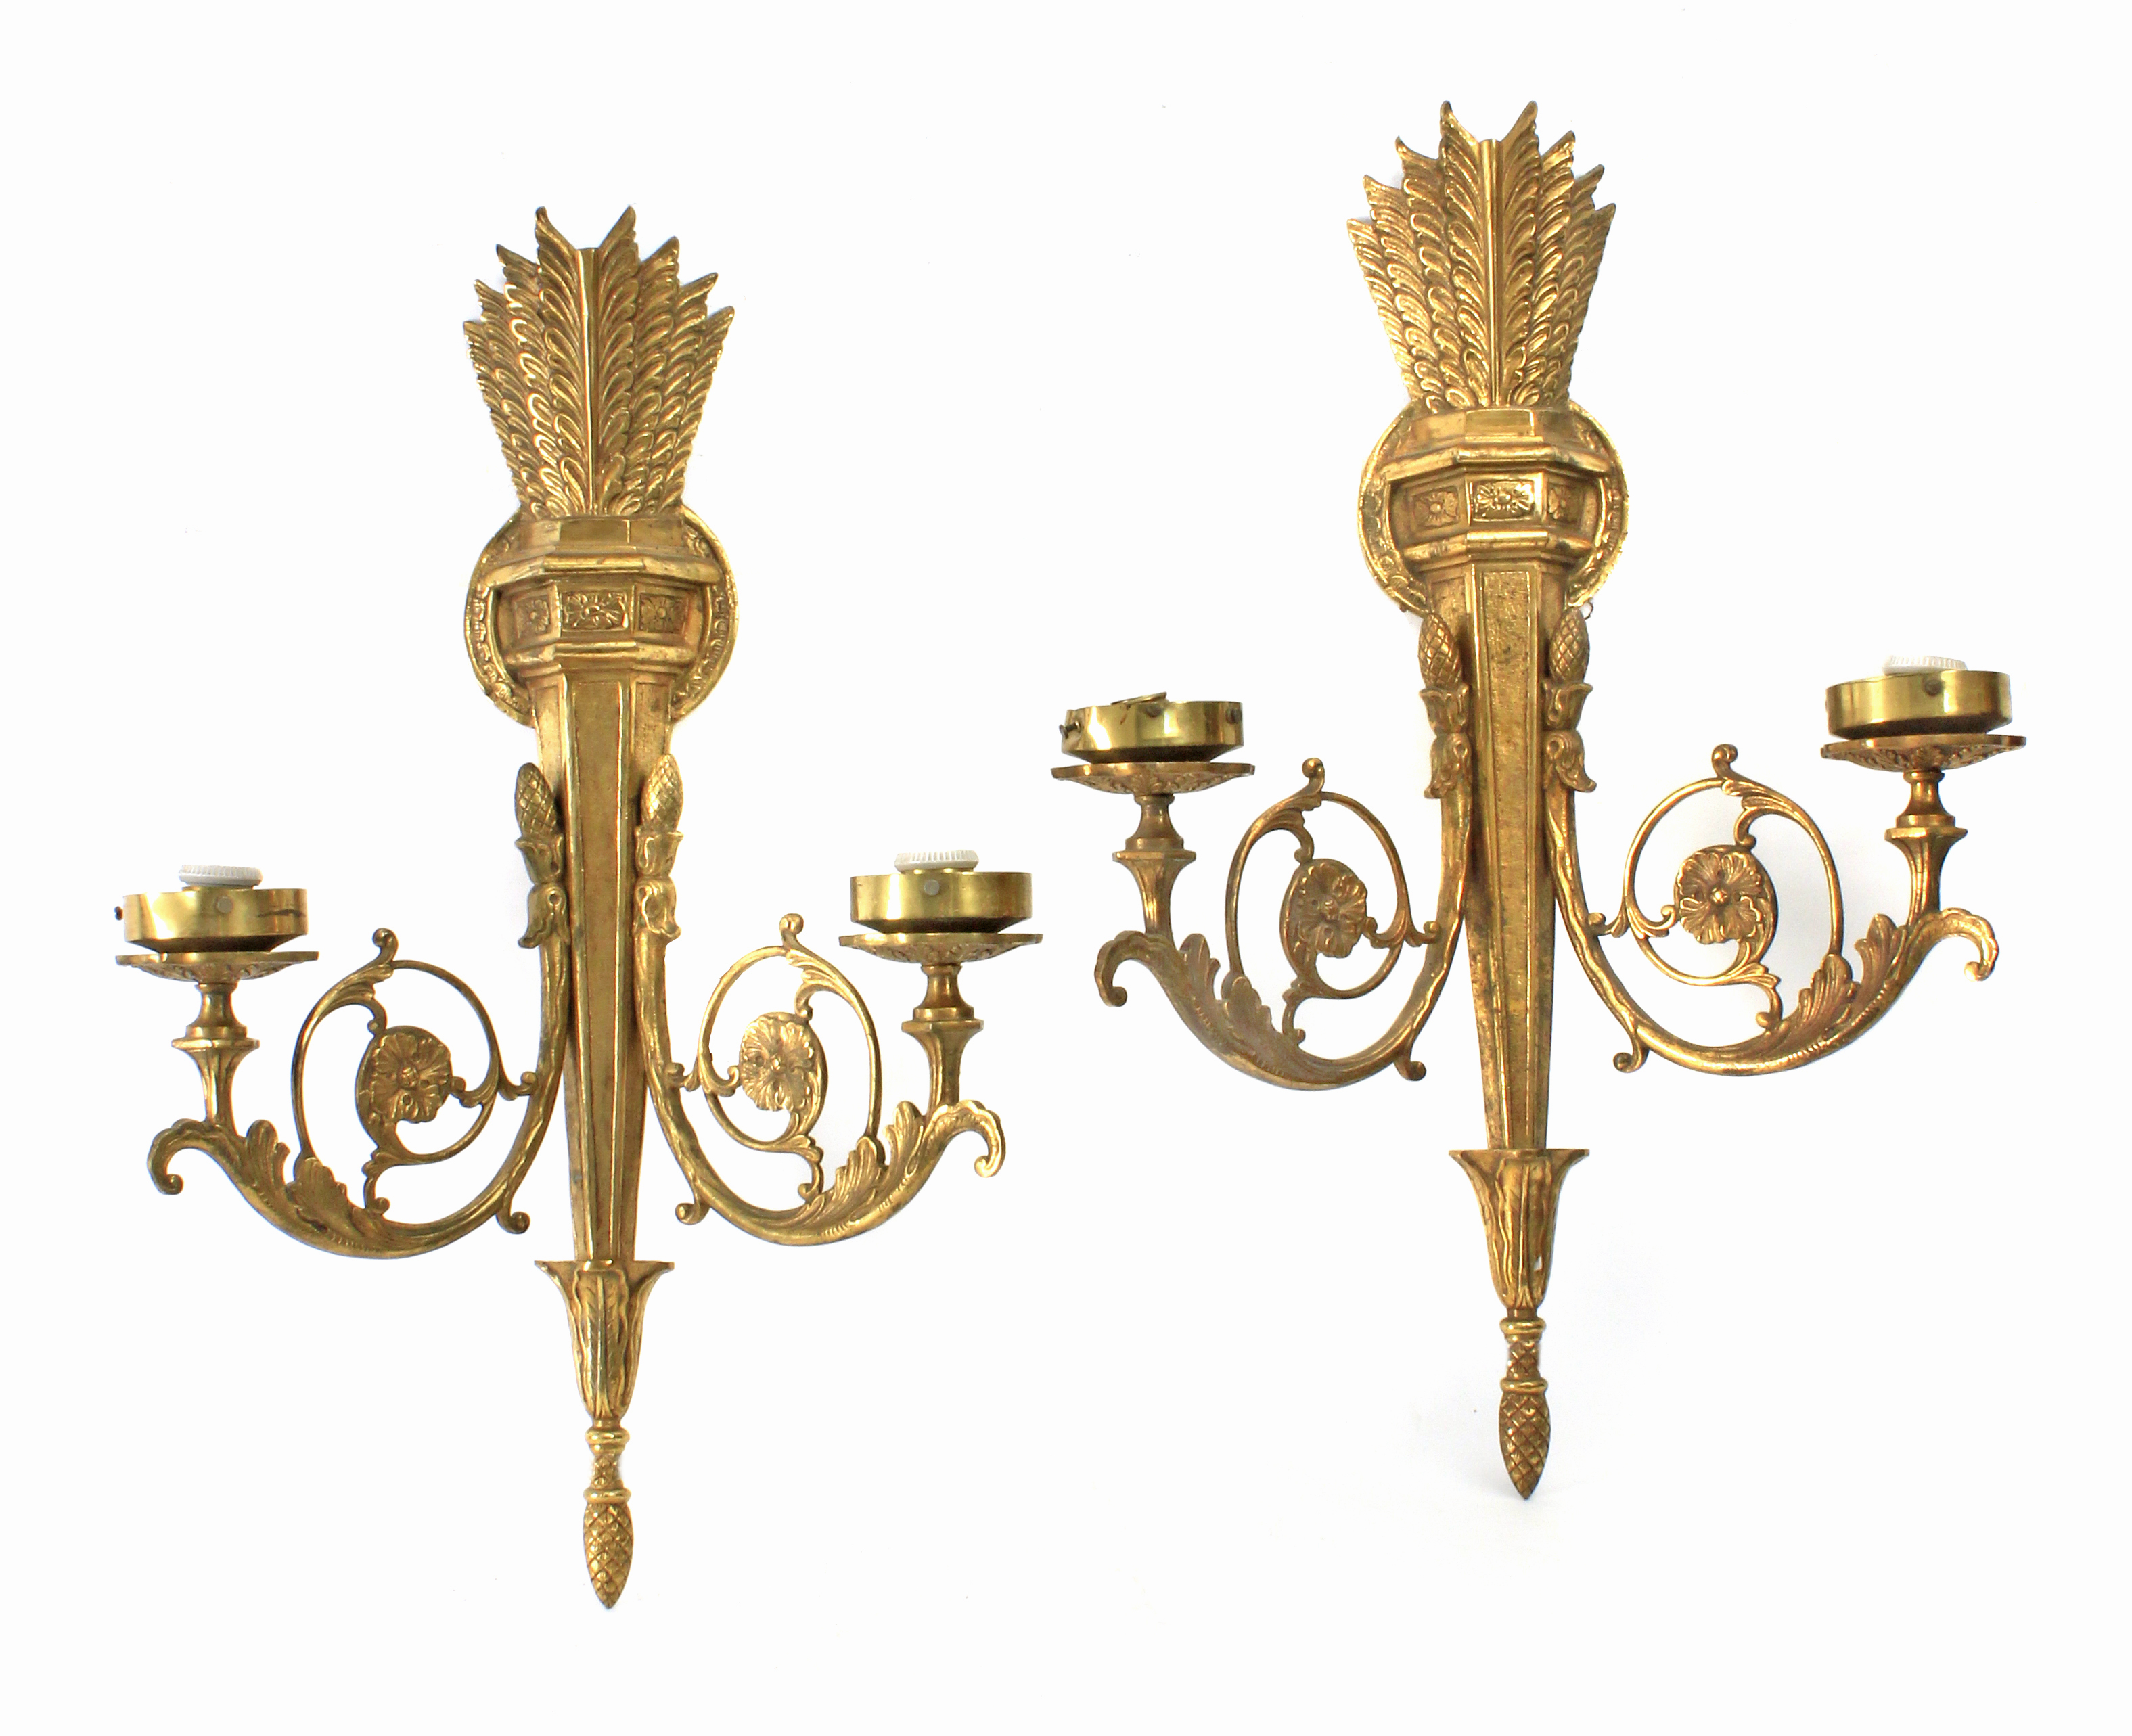 A pair of 19th century French Empire period gilt bronze wall lights